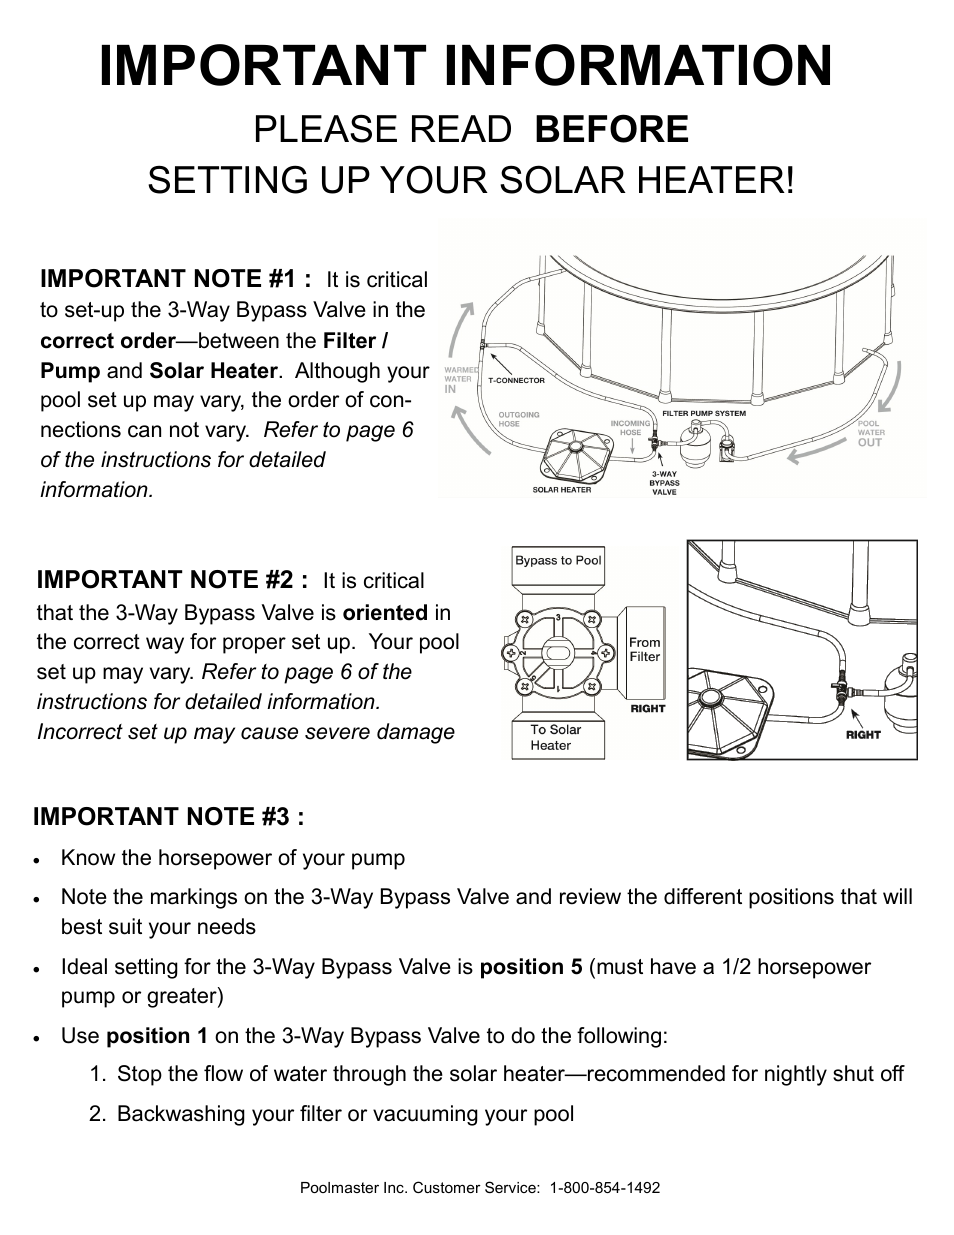 59025 Solar Heater Important Note